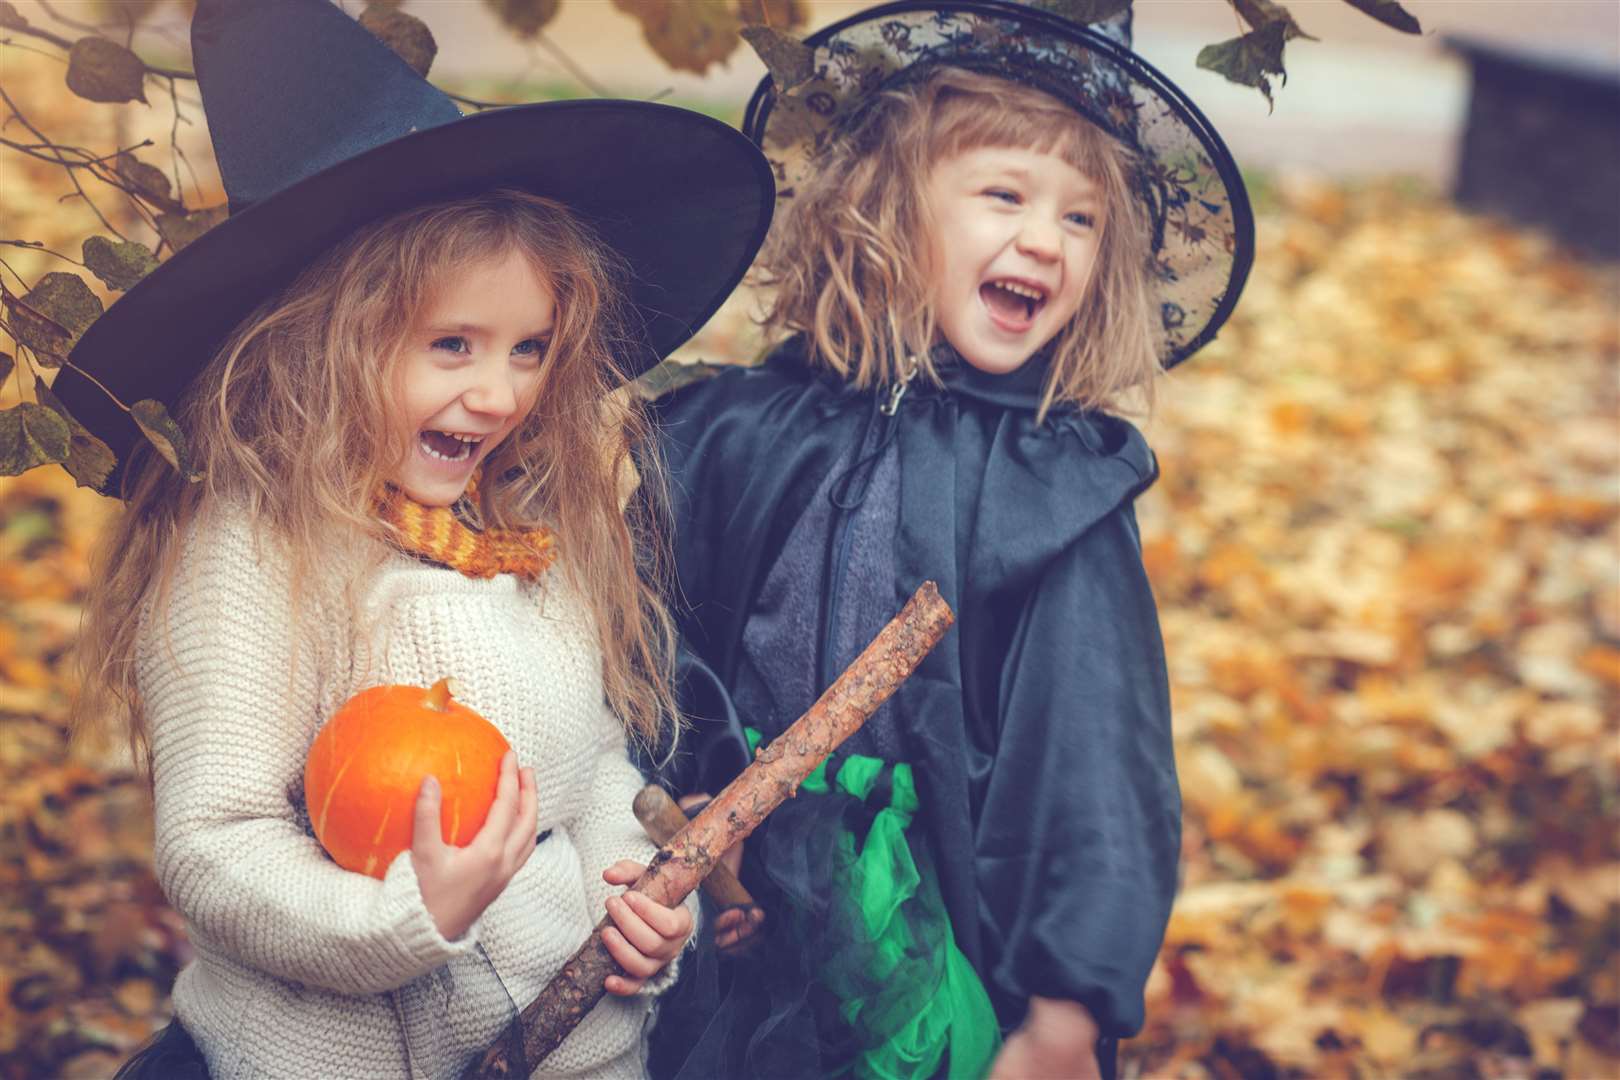 Plenty of Kent attractions open their Halloween events this weekend in time for half term